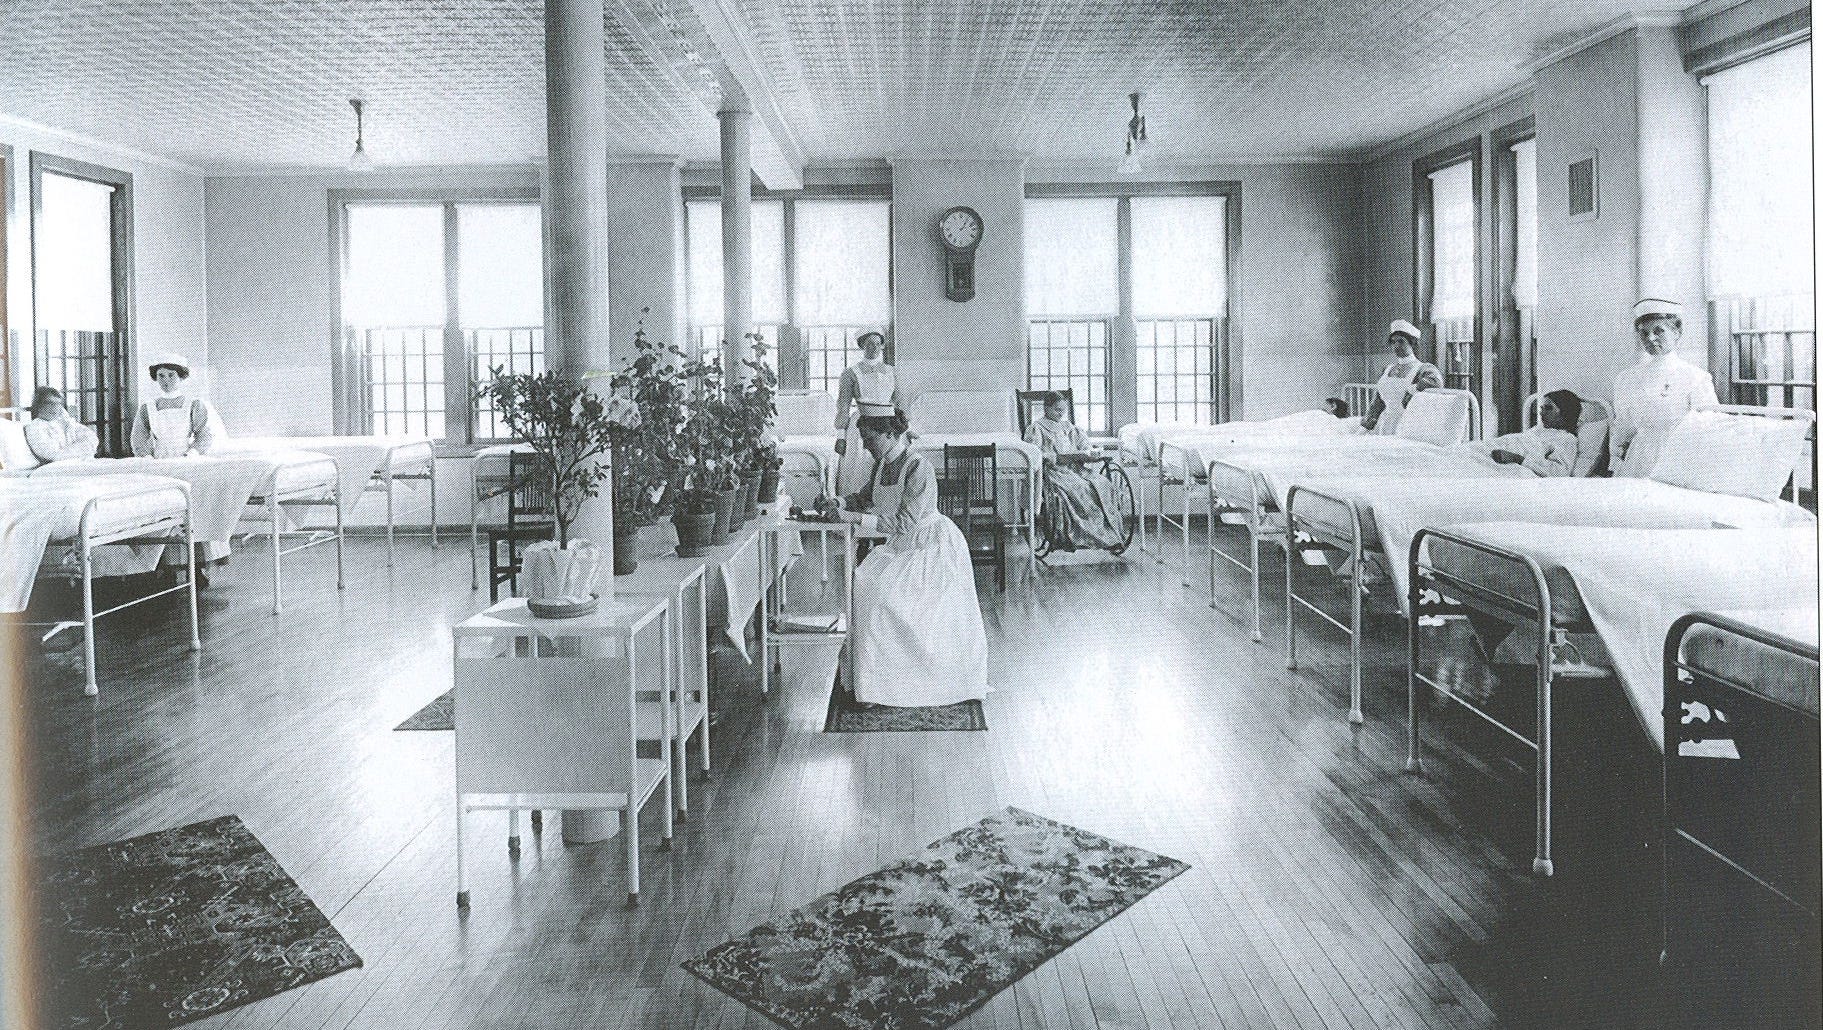 Taunton State Hospital offers years of service and healing